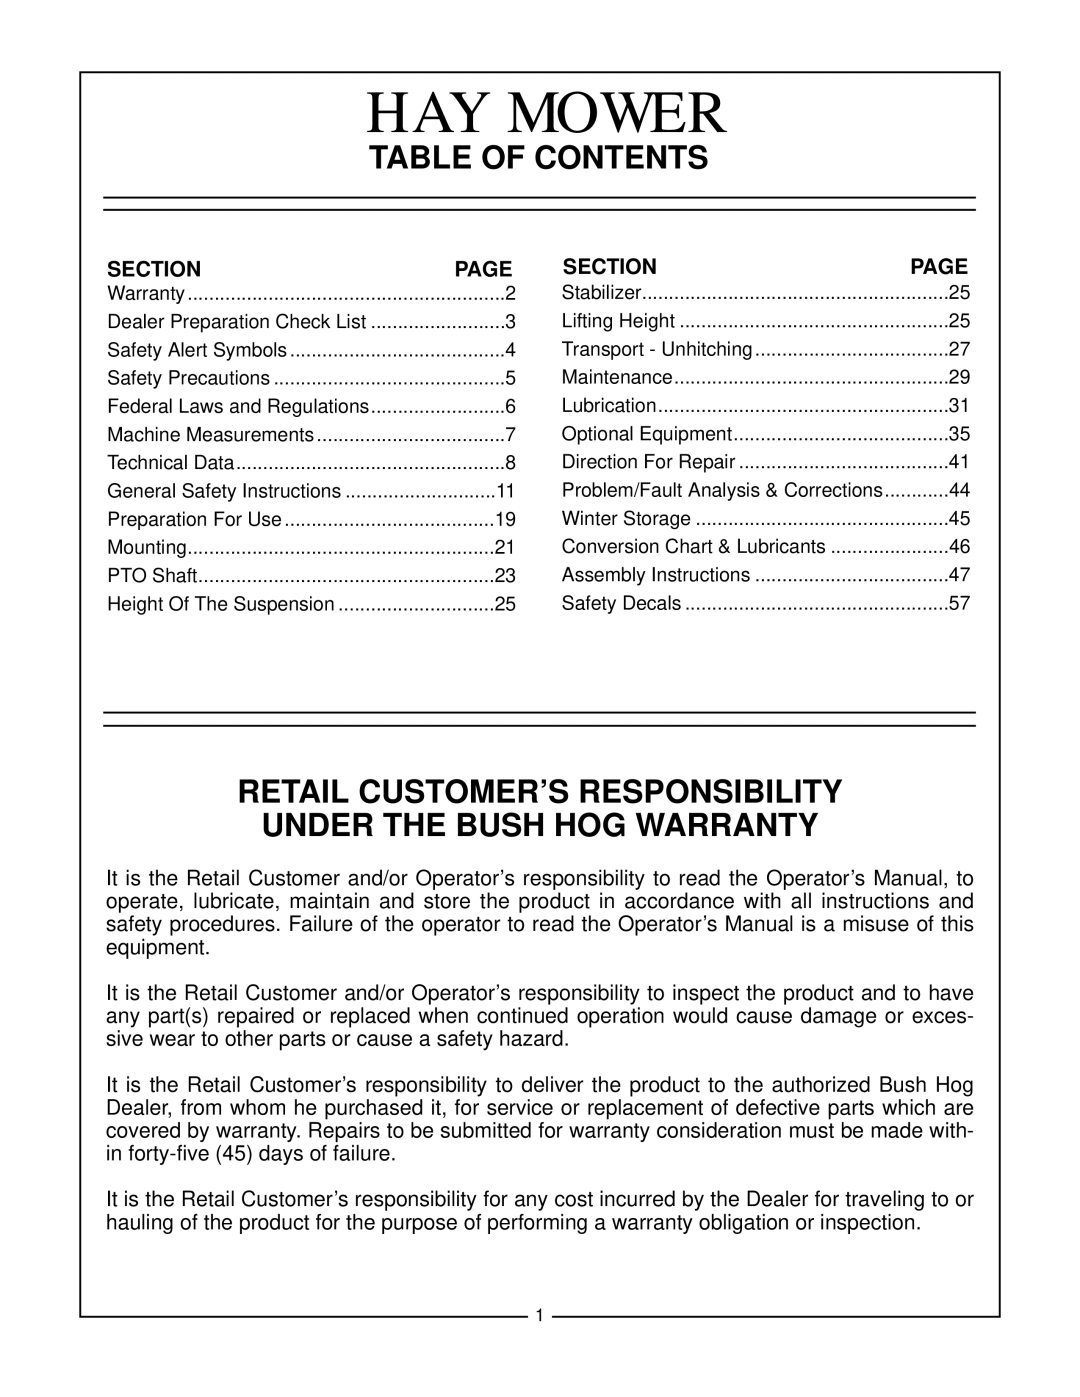 Bush Hog HM2008 Table Of Contents, Retail Customer’S Responsibility Under The Bush Hog Warranty, Hay Mower, Section, Page 